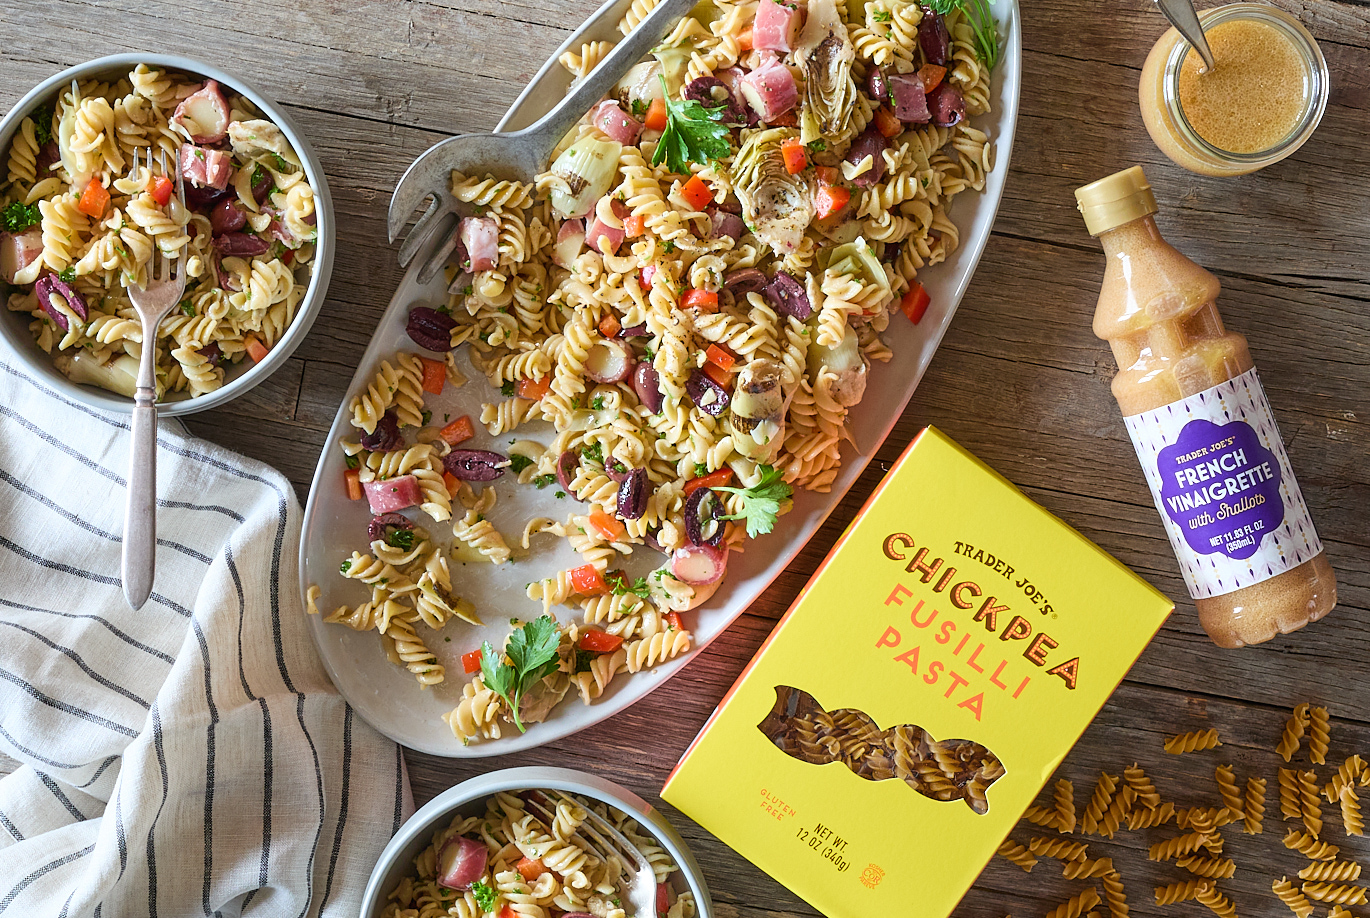 Trader Joe's Chickpea Fusilli Pasta and French Vinaigrette, shown in recipe for 'Antipasto Pasta Salad'. Serving platter and two bowls of Antipasto Pasta Salad, on top of a rustic wood surface. Dried pasta and jar of vinaigrette on right side